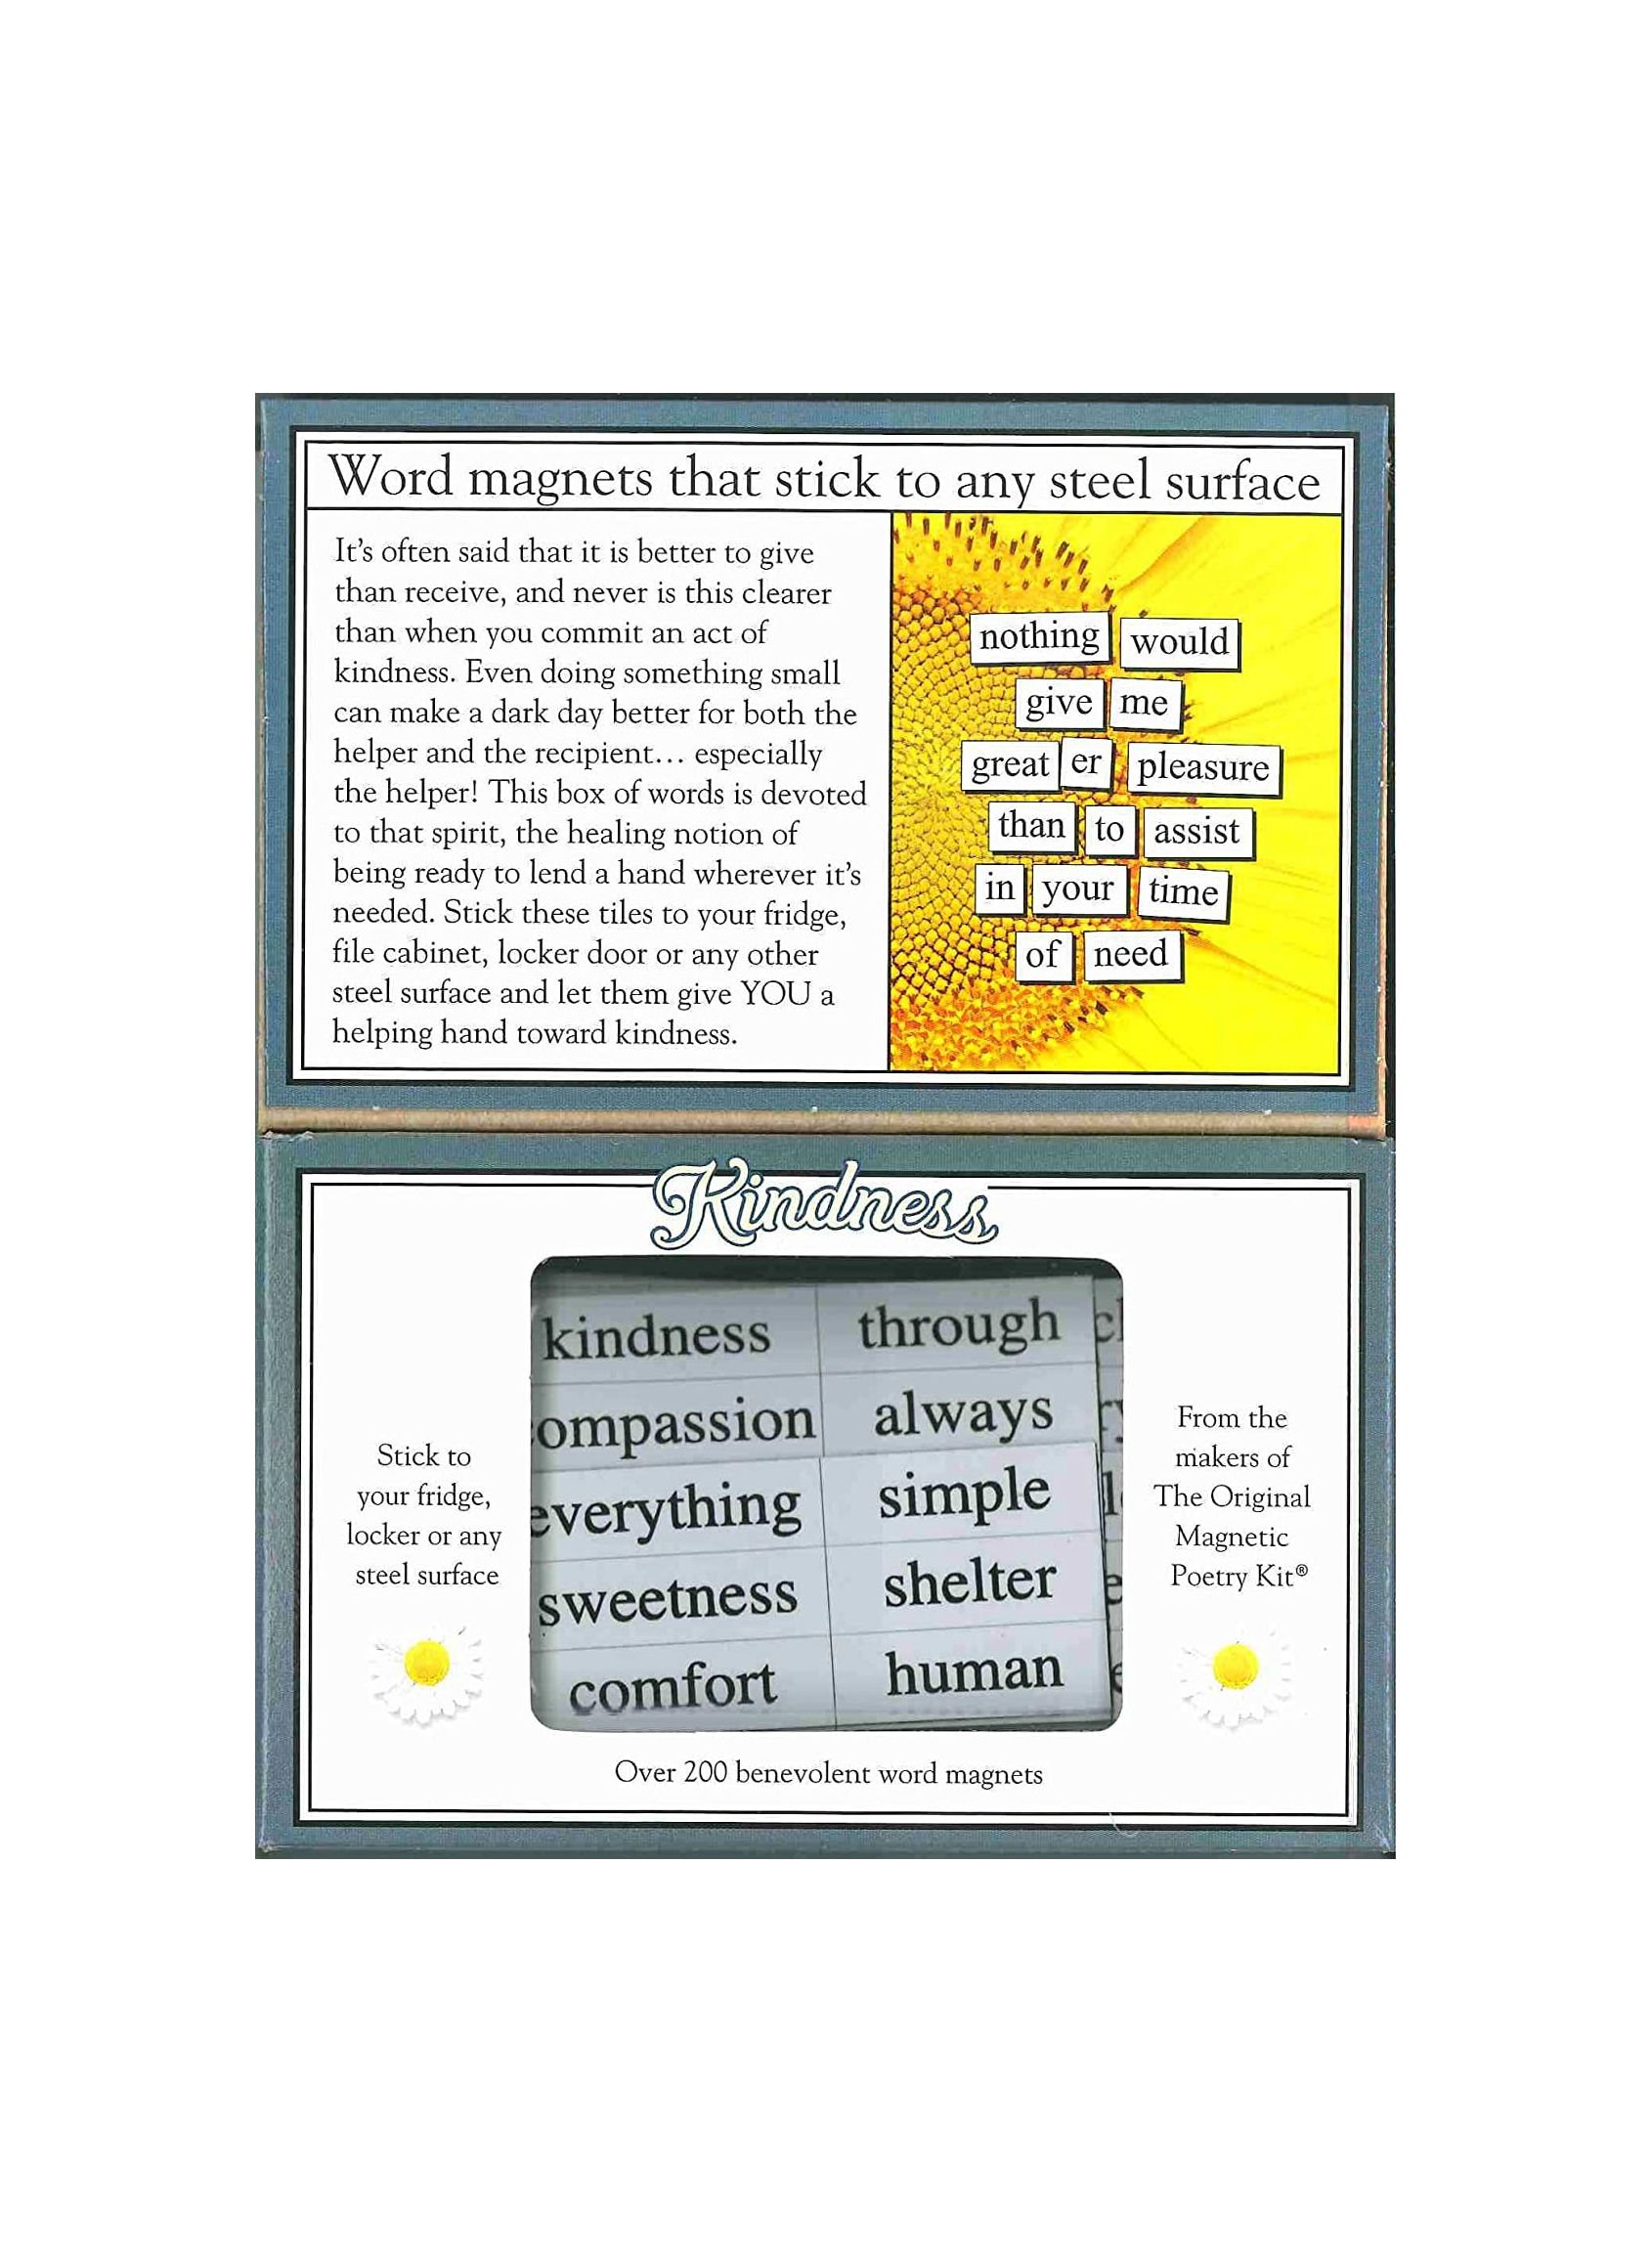 NEW KINDNESS Magnetic Poetry Kit 